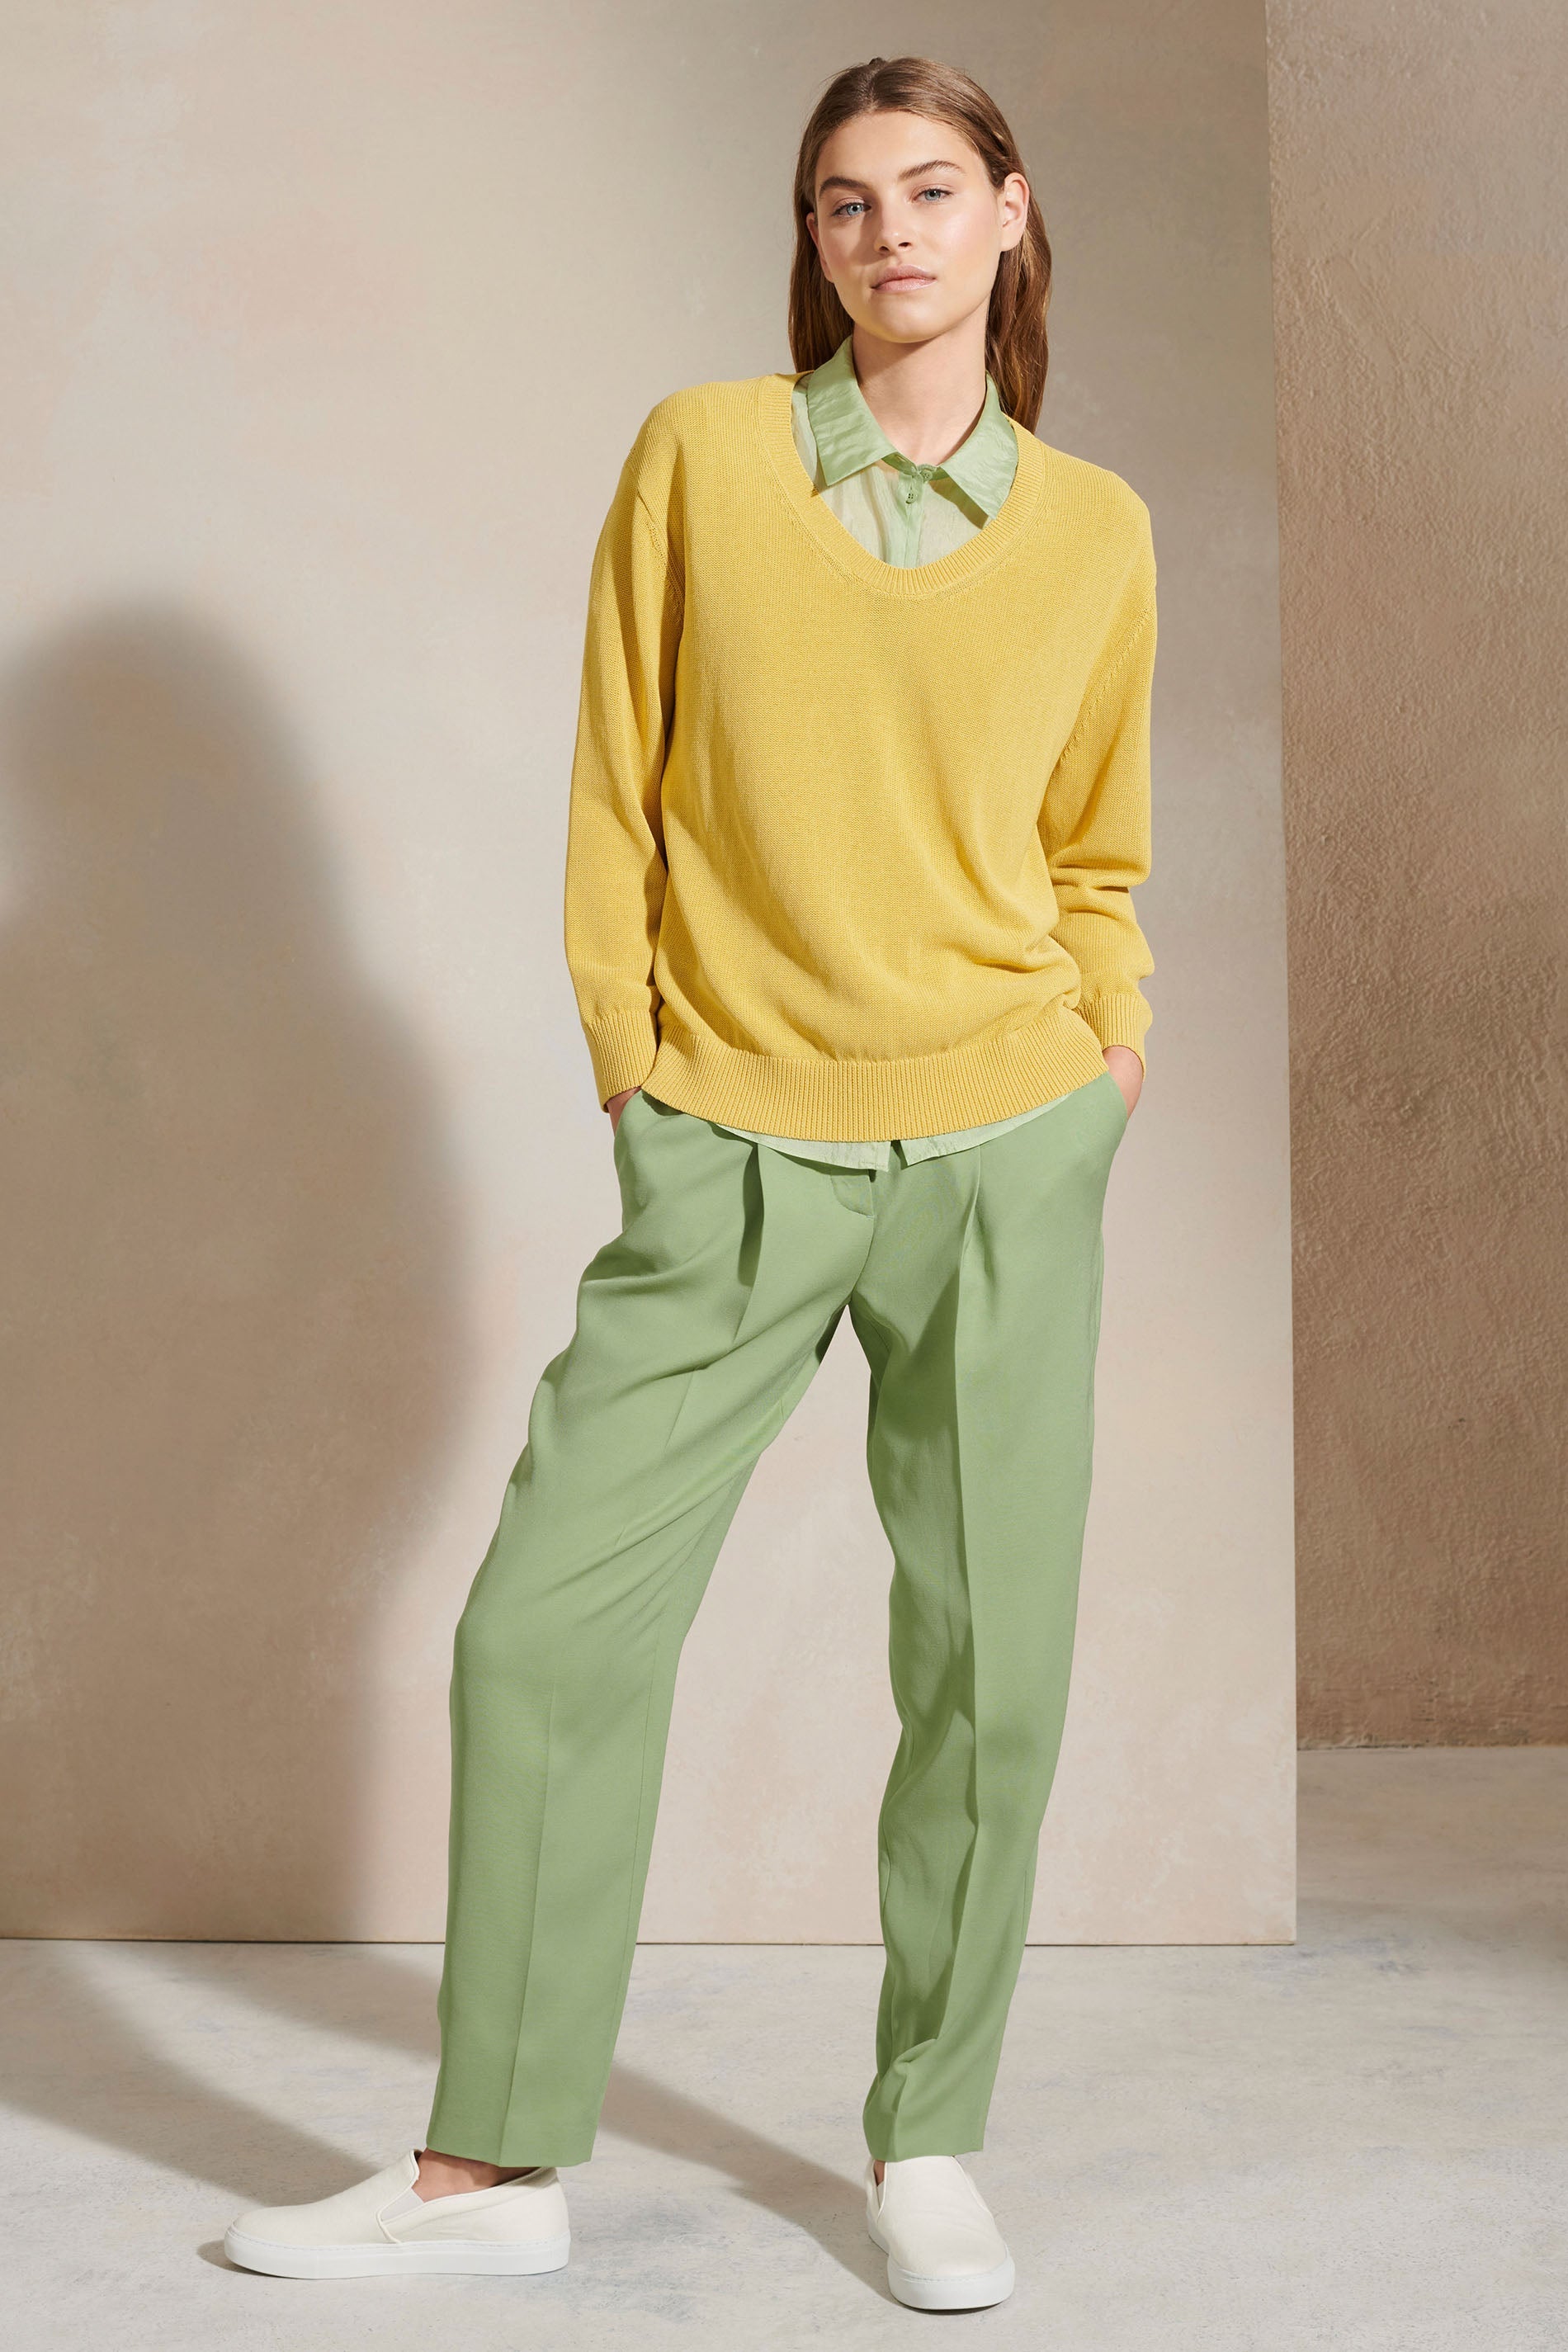 LUISA CERANO-OUTLET-SALE-Long-Pullover aus Baumwoll-Mix-Strick-34-sun yellow-by-ARCHIVIST